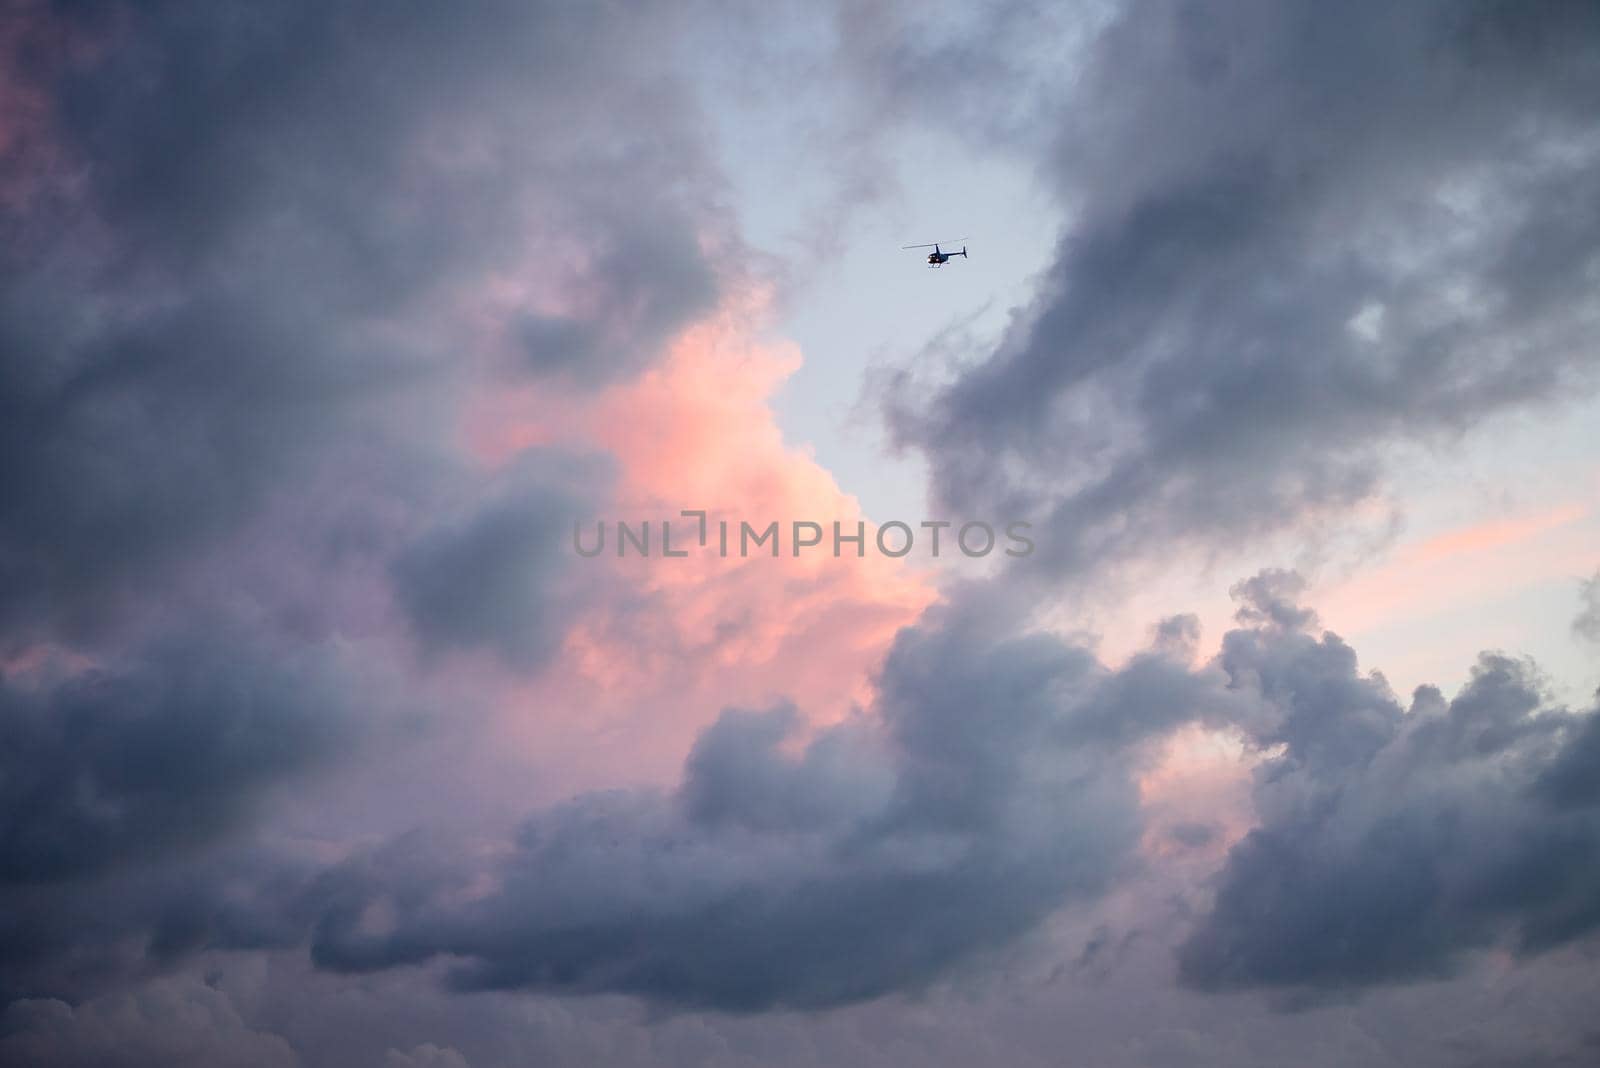 Heavenly view of pastel pink and purple clouds with single object helicopter flying into the abyss. Artistic view of sky